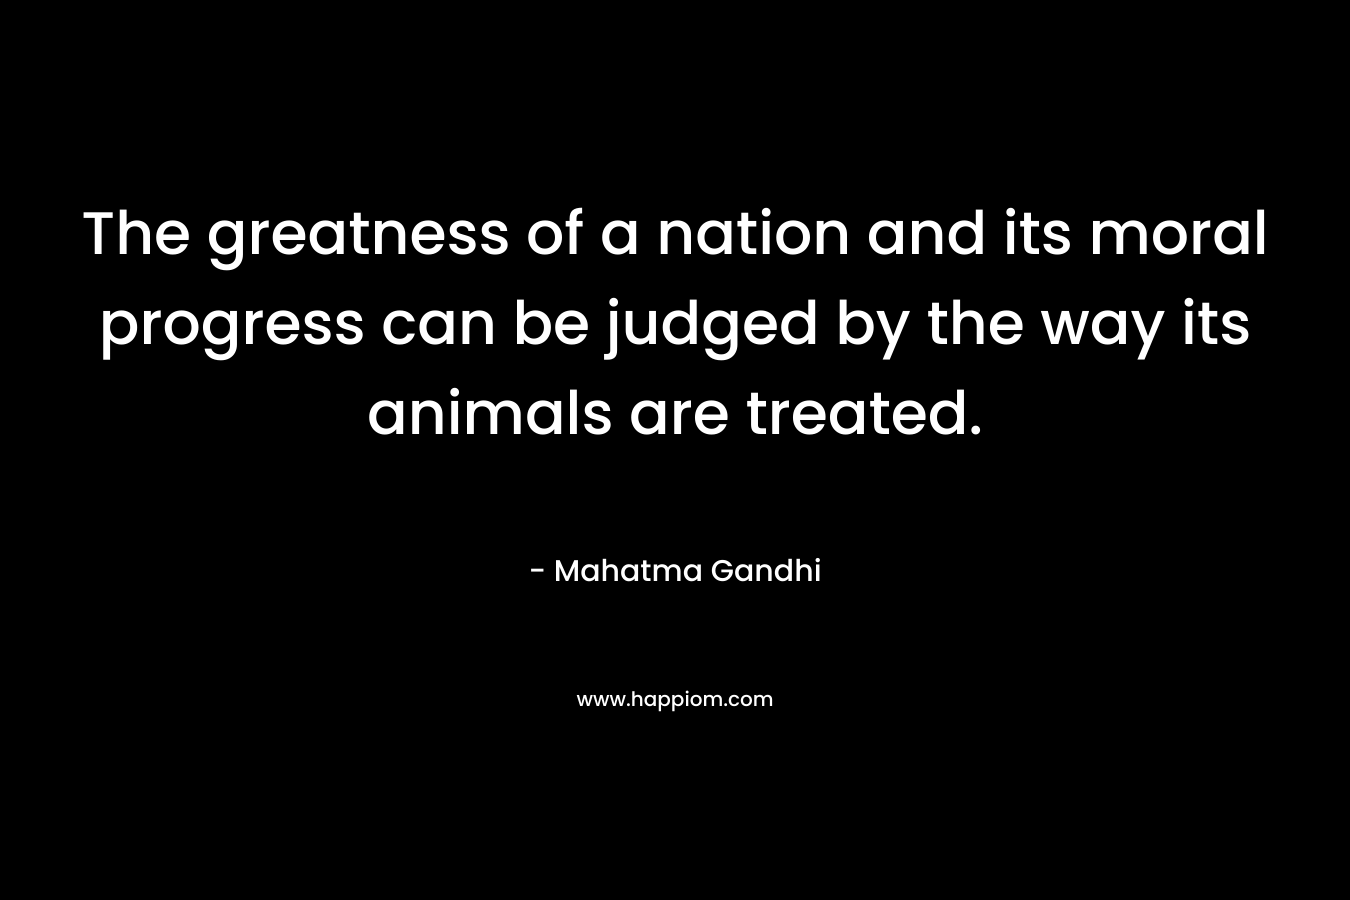 The greatness of a nation and its moral progress can be judged by the way its animals are treated. – Mahatma Gandhi